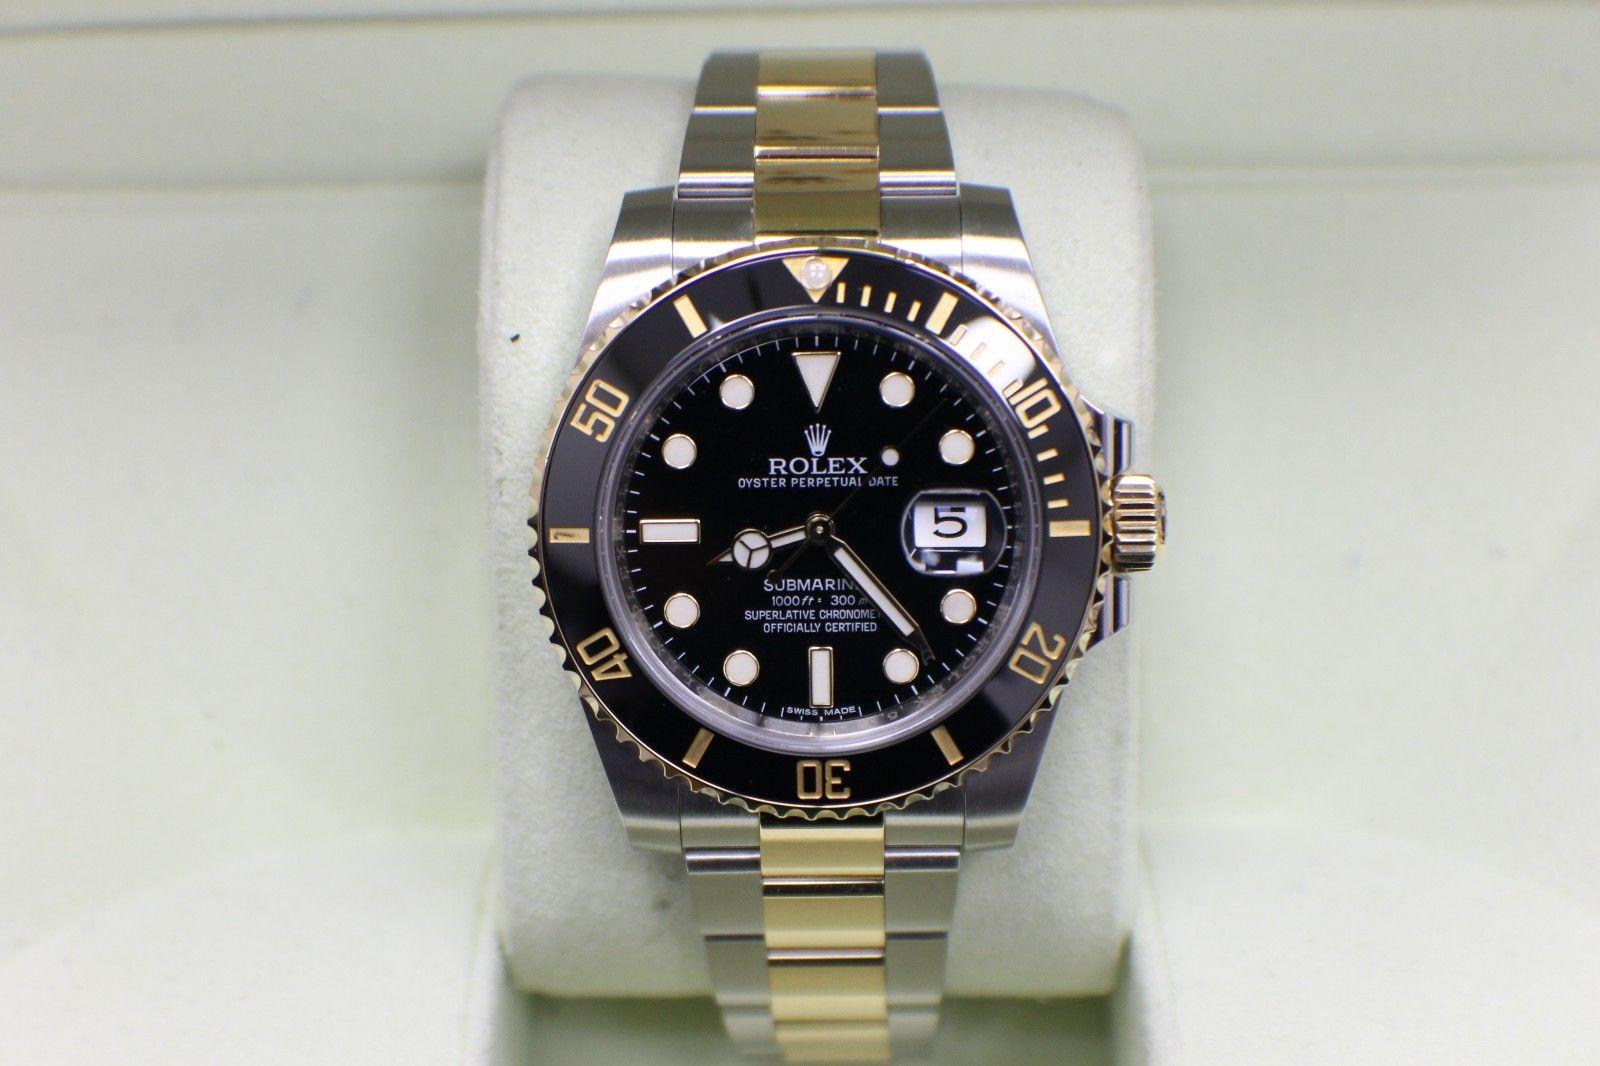 Style Number: 116613
Serial: 5381Q***
Year: 2016
Model: Submariner
Case Material: Stainless Steel
Band: 18K Yellow Gold & Stainless Steel
Bezel: Black Ceramic 
Dial: Black
Face: Sapphire Crystal 
Case Size: 40mm 
Includes: 
-Rolex Box &